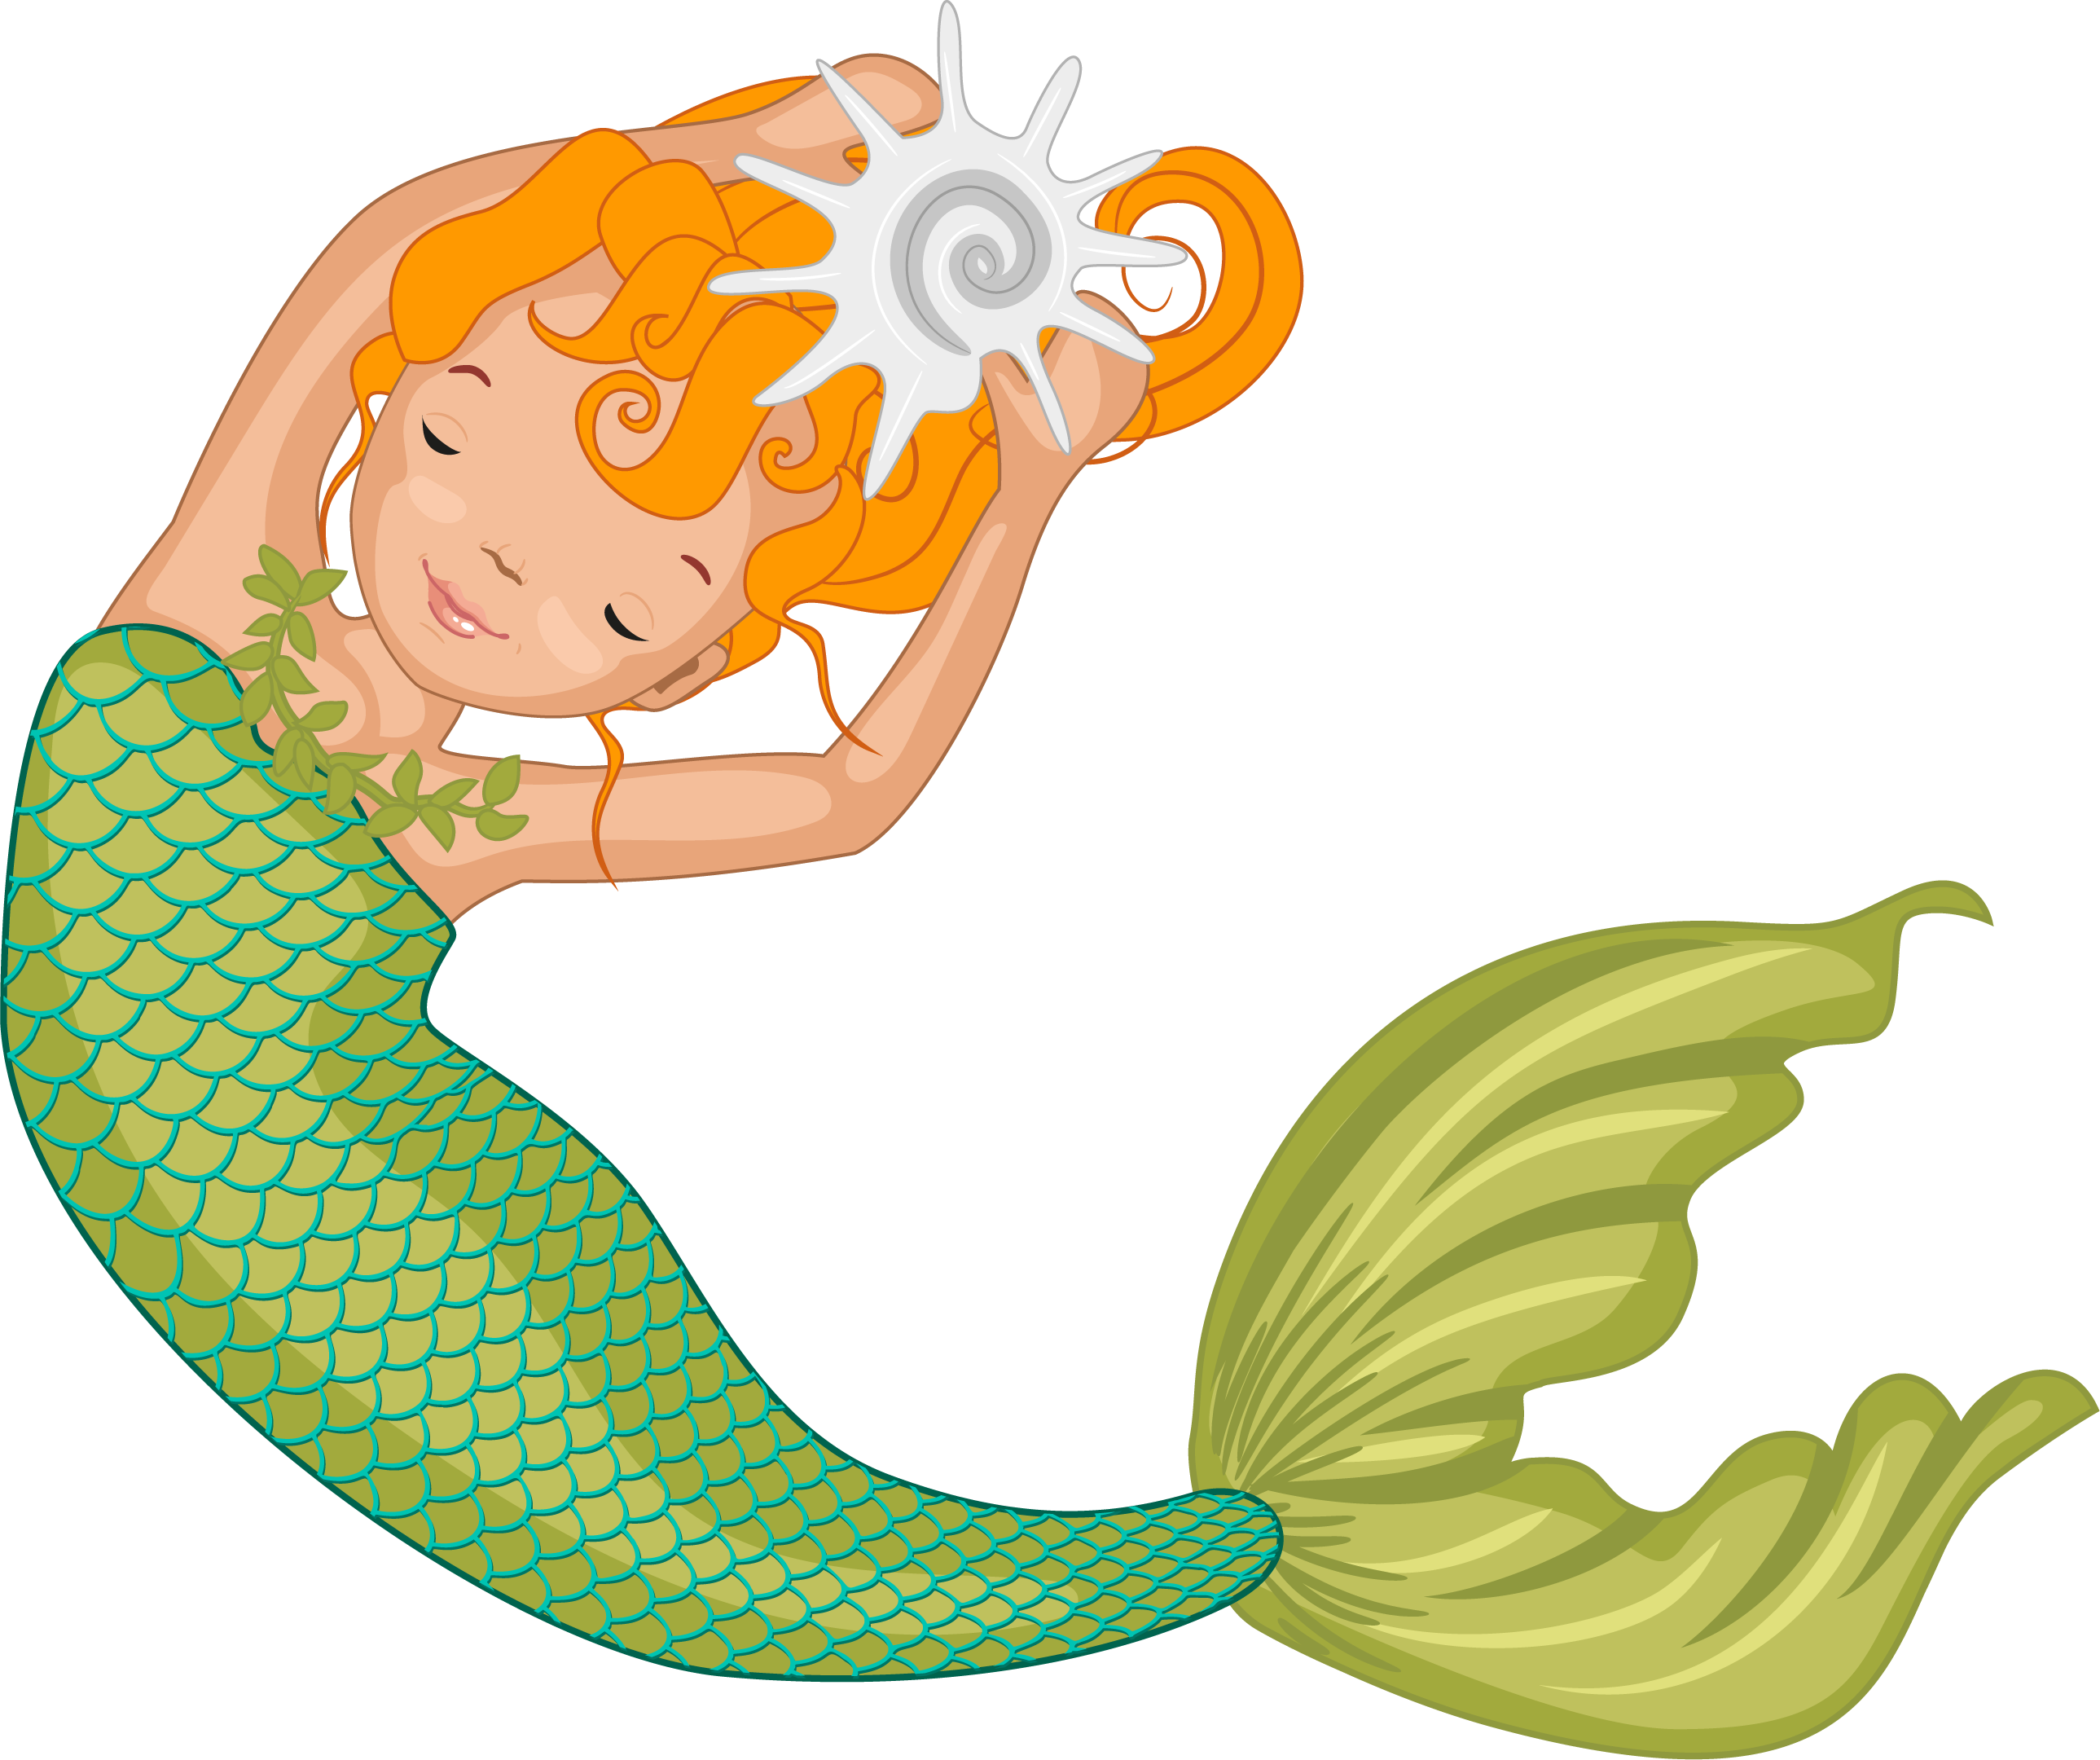 A mermaid with something in her hands.